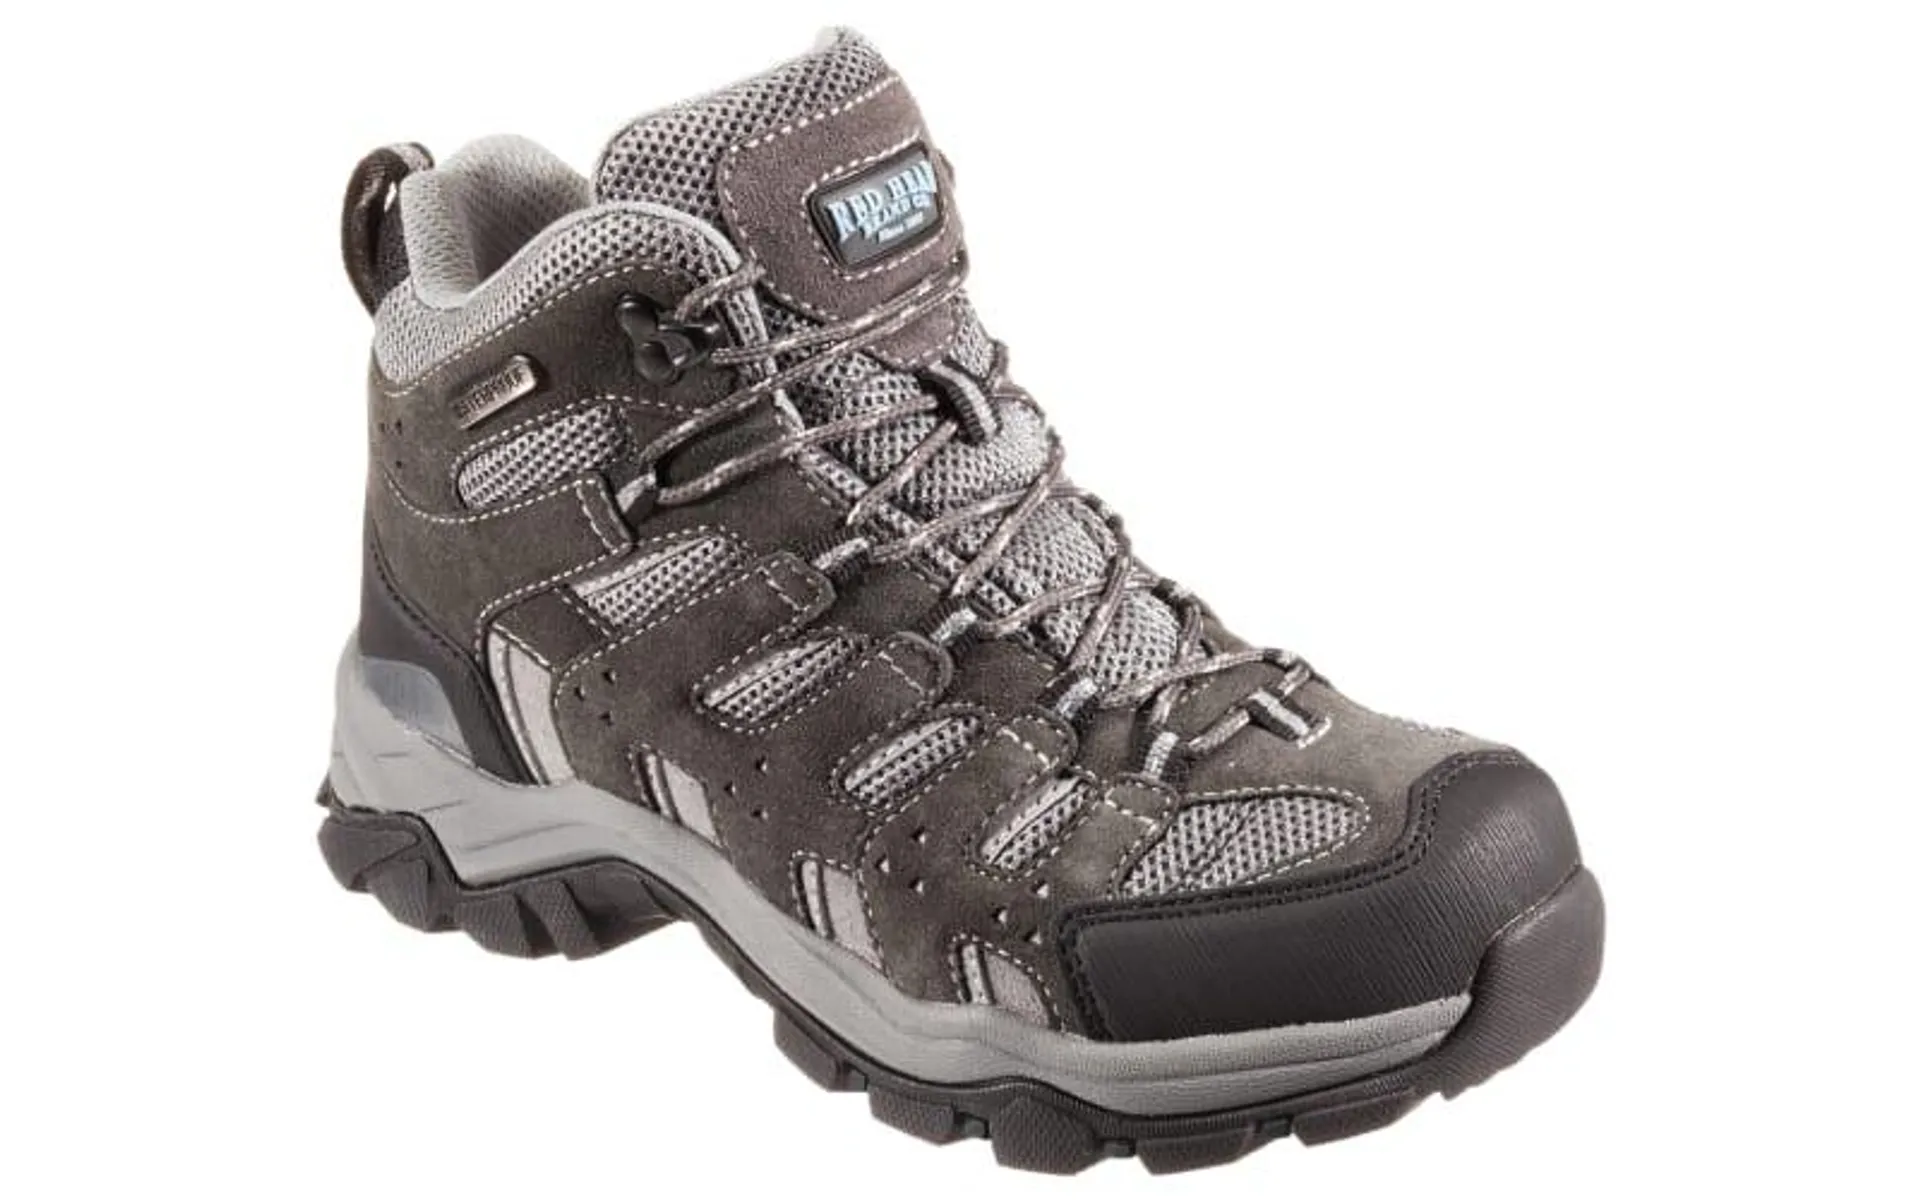 RedHead Overland Mid Waterproof Hiking Boots for Ladies